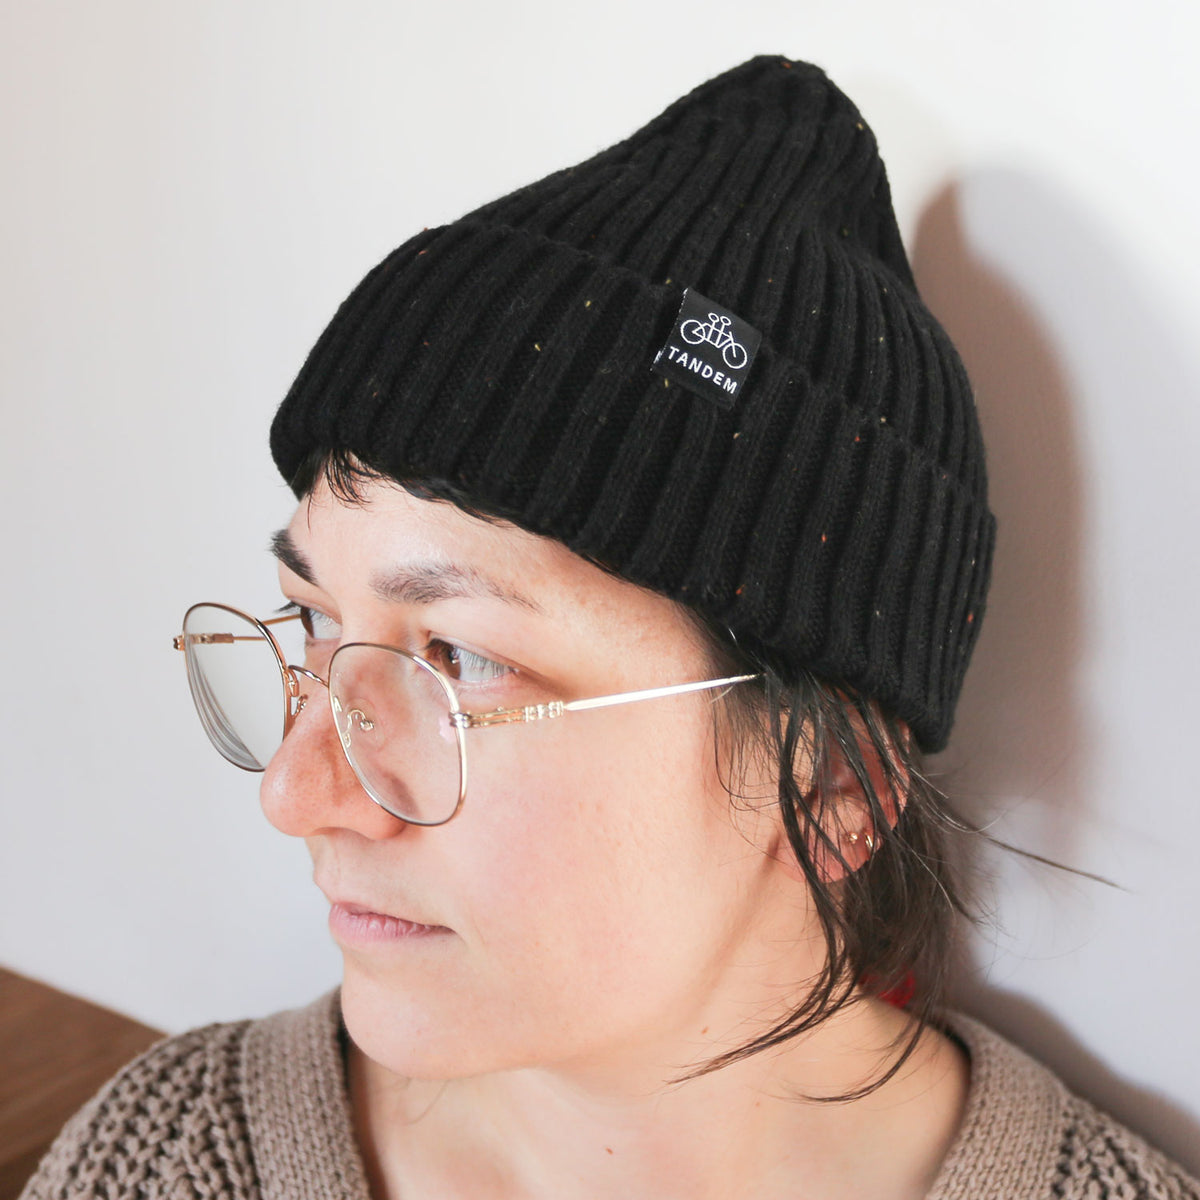 A person with short hair wearing glasses and a black ribbed Tandem Coffee Roasters merino wool beanie with a logo on the front, looking to the side against a plain background.